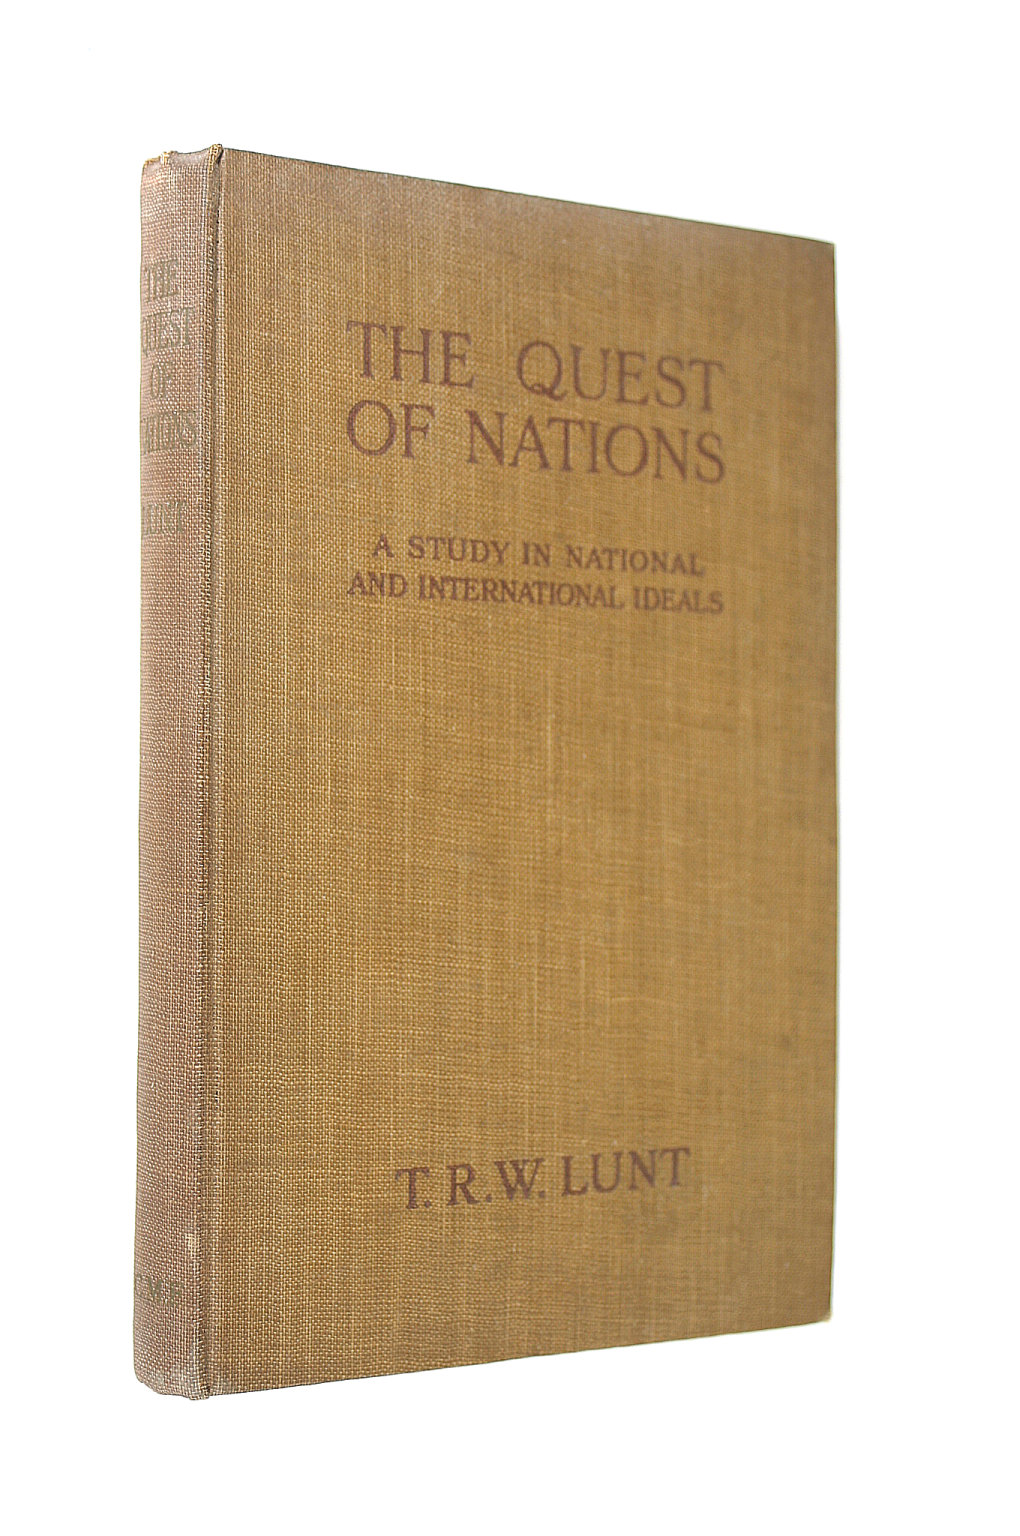 LUNT, THEODORE - The Quest of Nations: A Study in National and International Ideals.